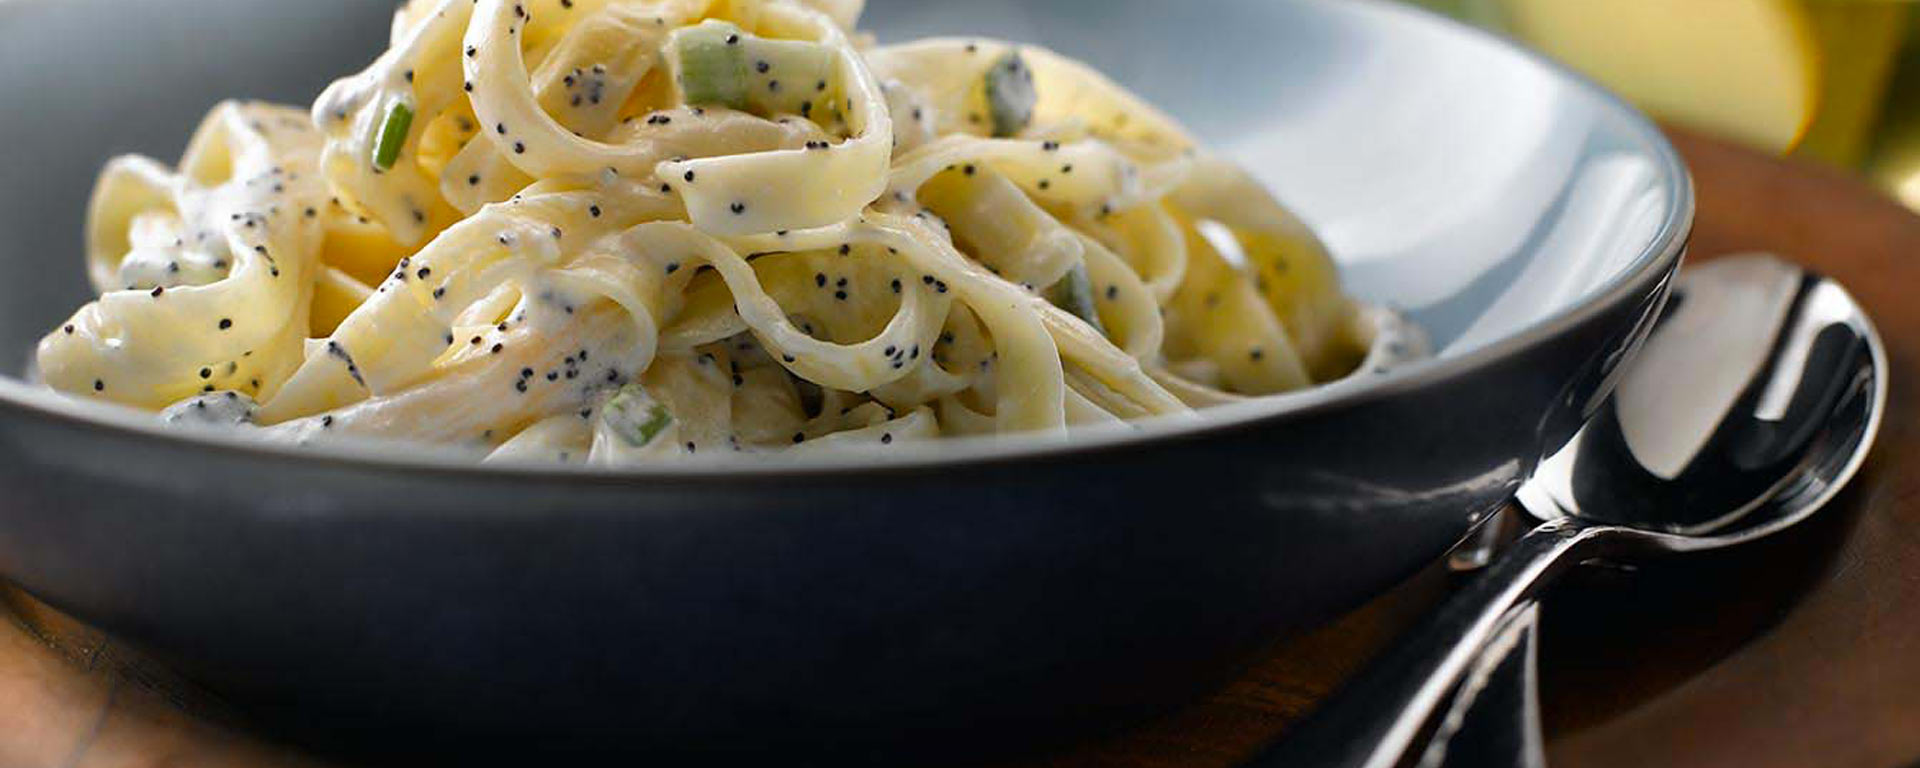 Photo for - Sour Cream and Poppy Seed Fettuccine